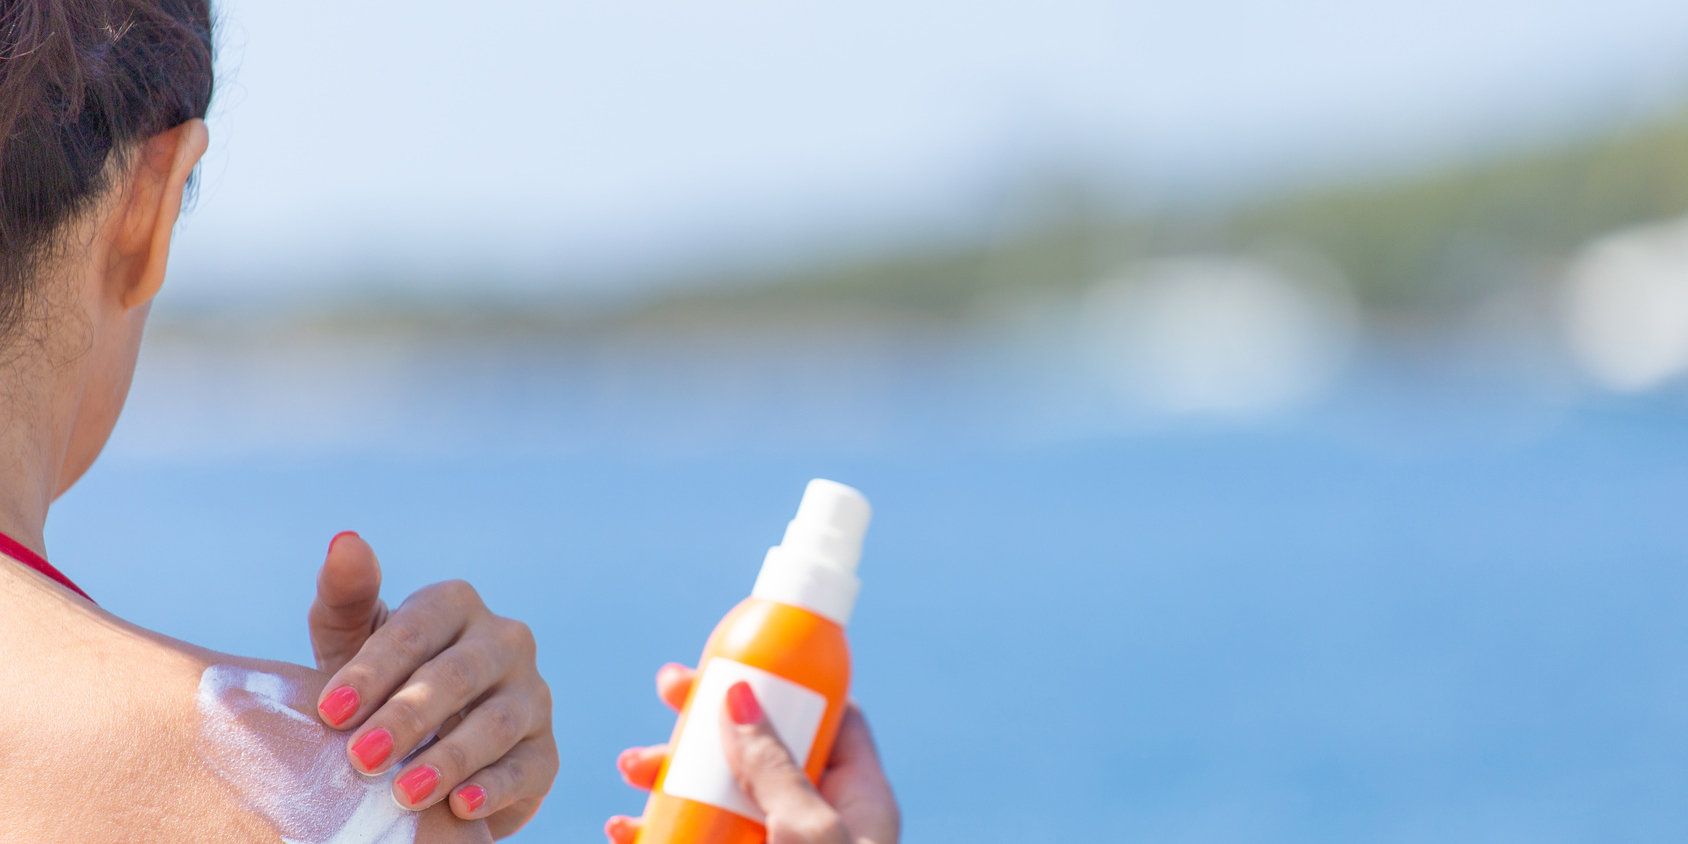 Is Your Sunscreen Making You Sick?